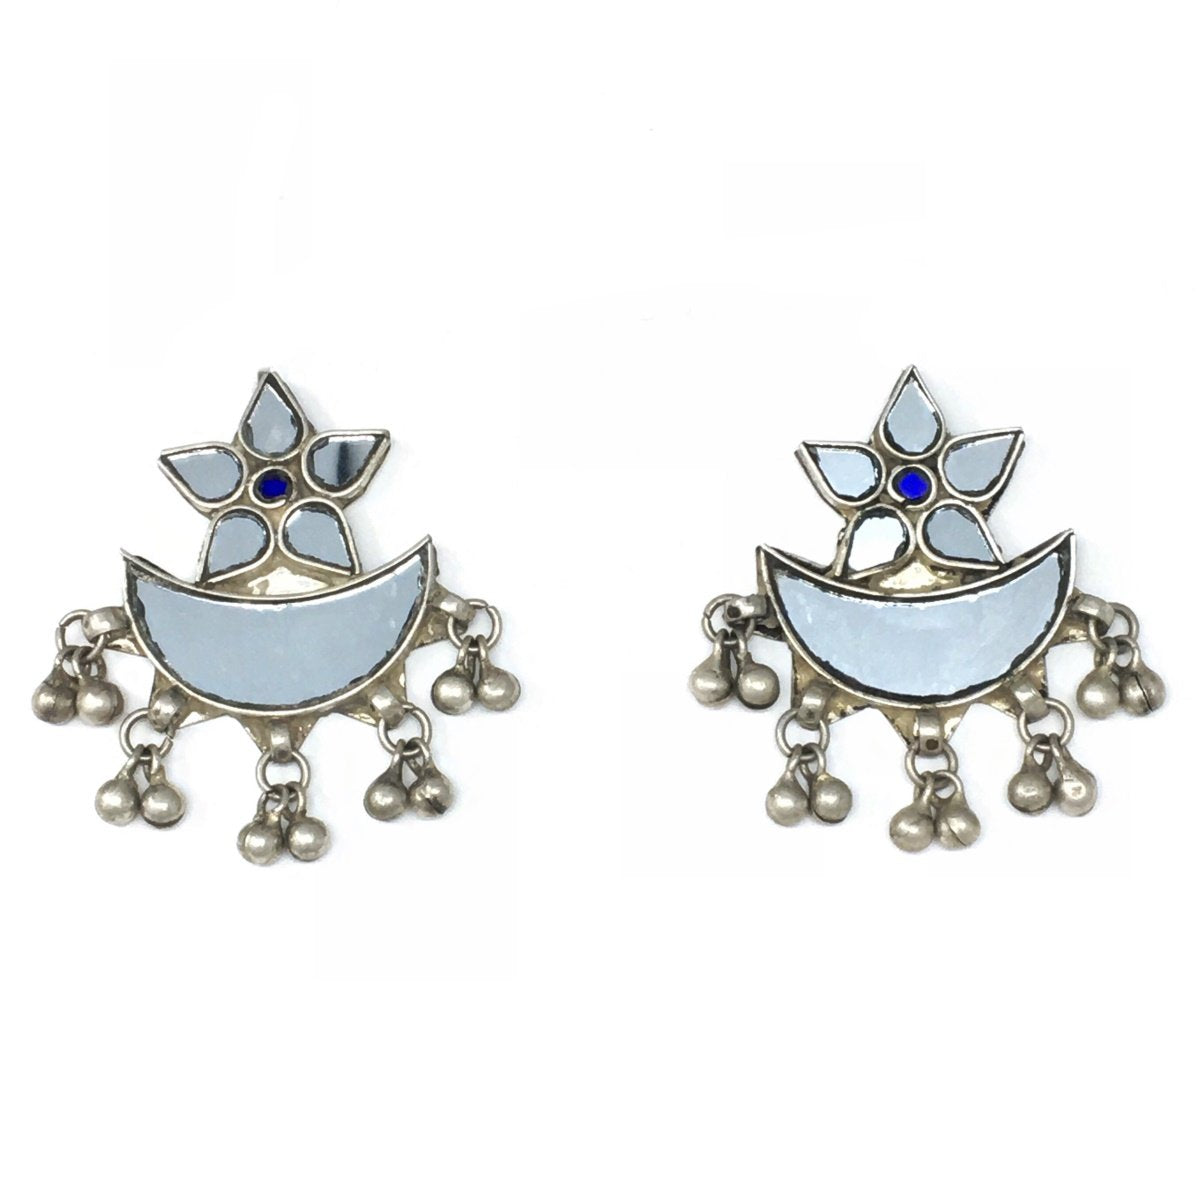 Silver Mirror Earrings with Flower Design and Ghungroos